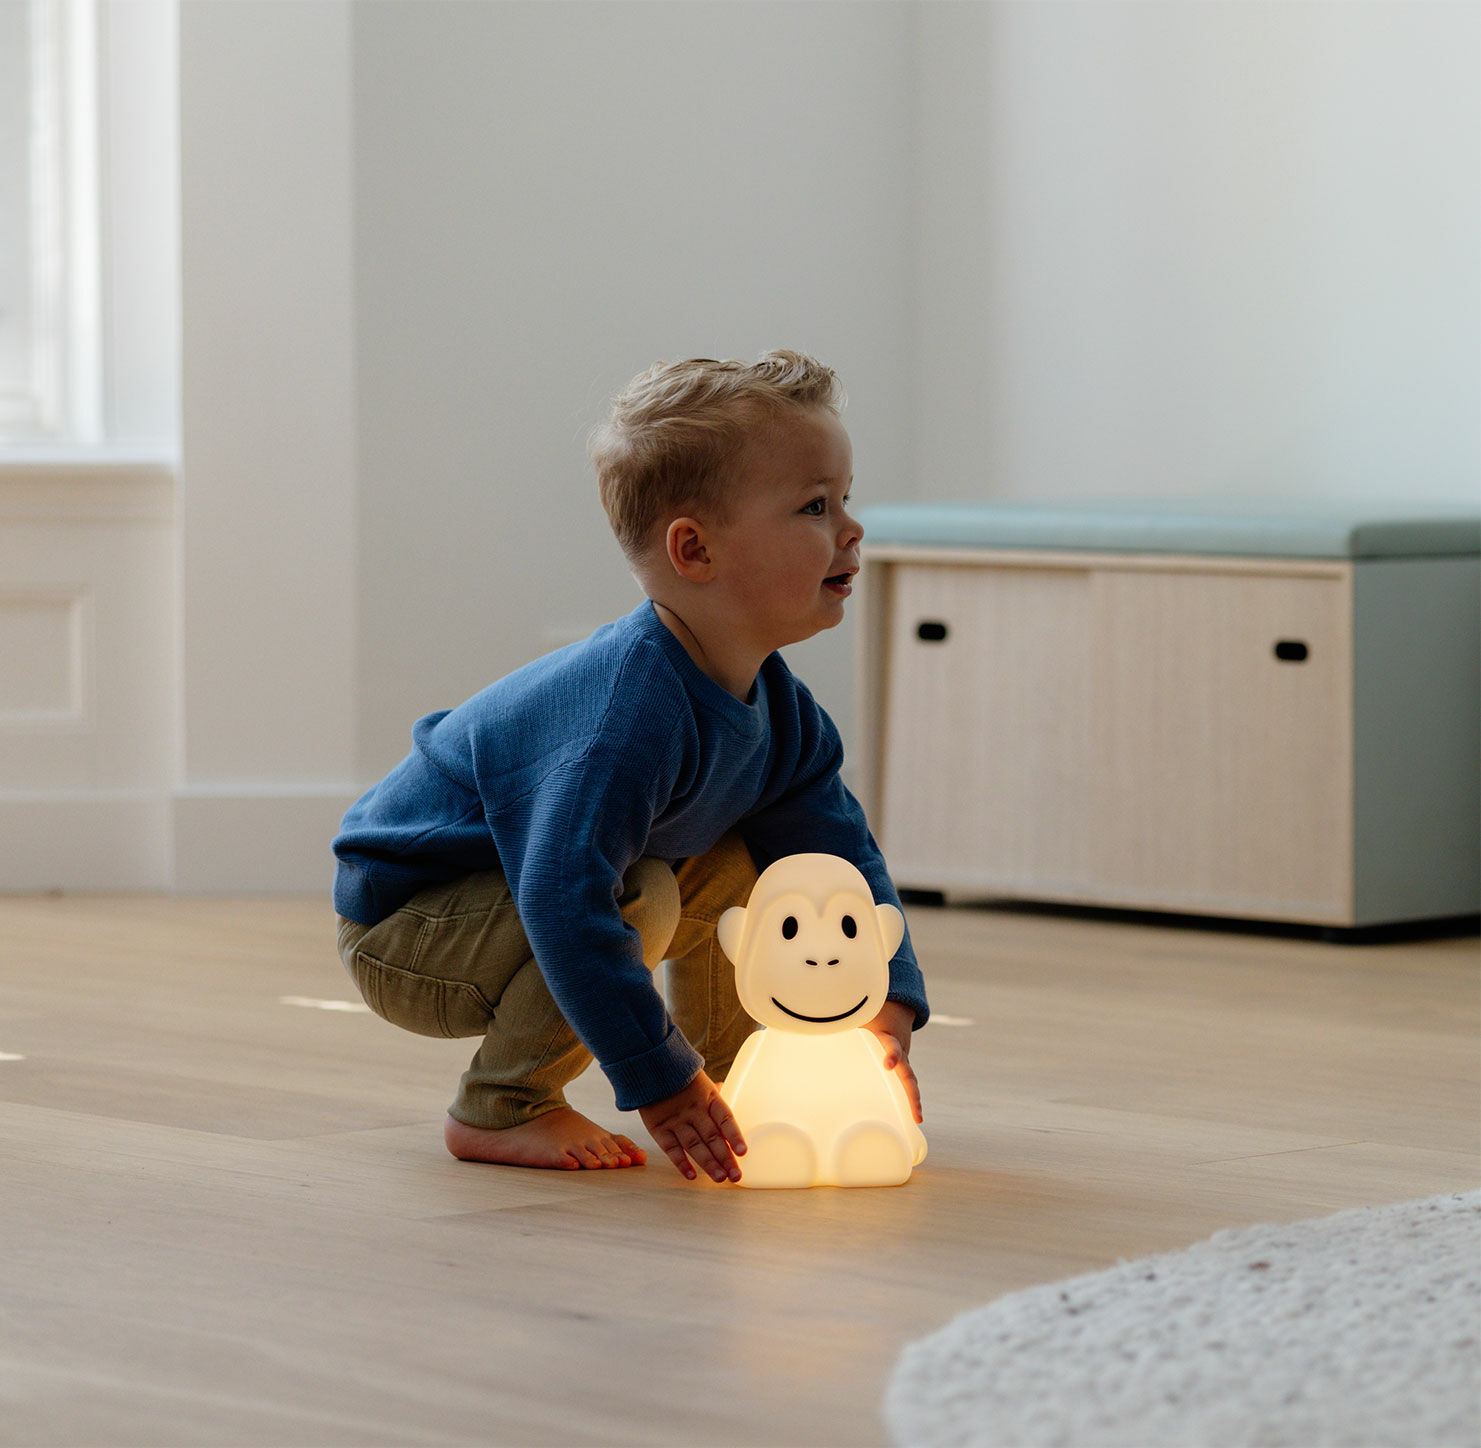 Cordless LED night light "Monkey", dimmable by Mr. Maria